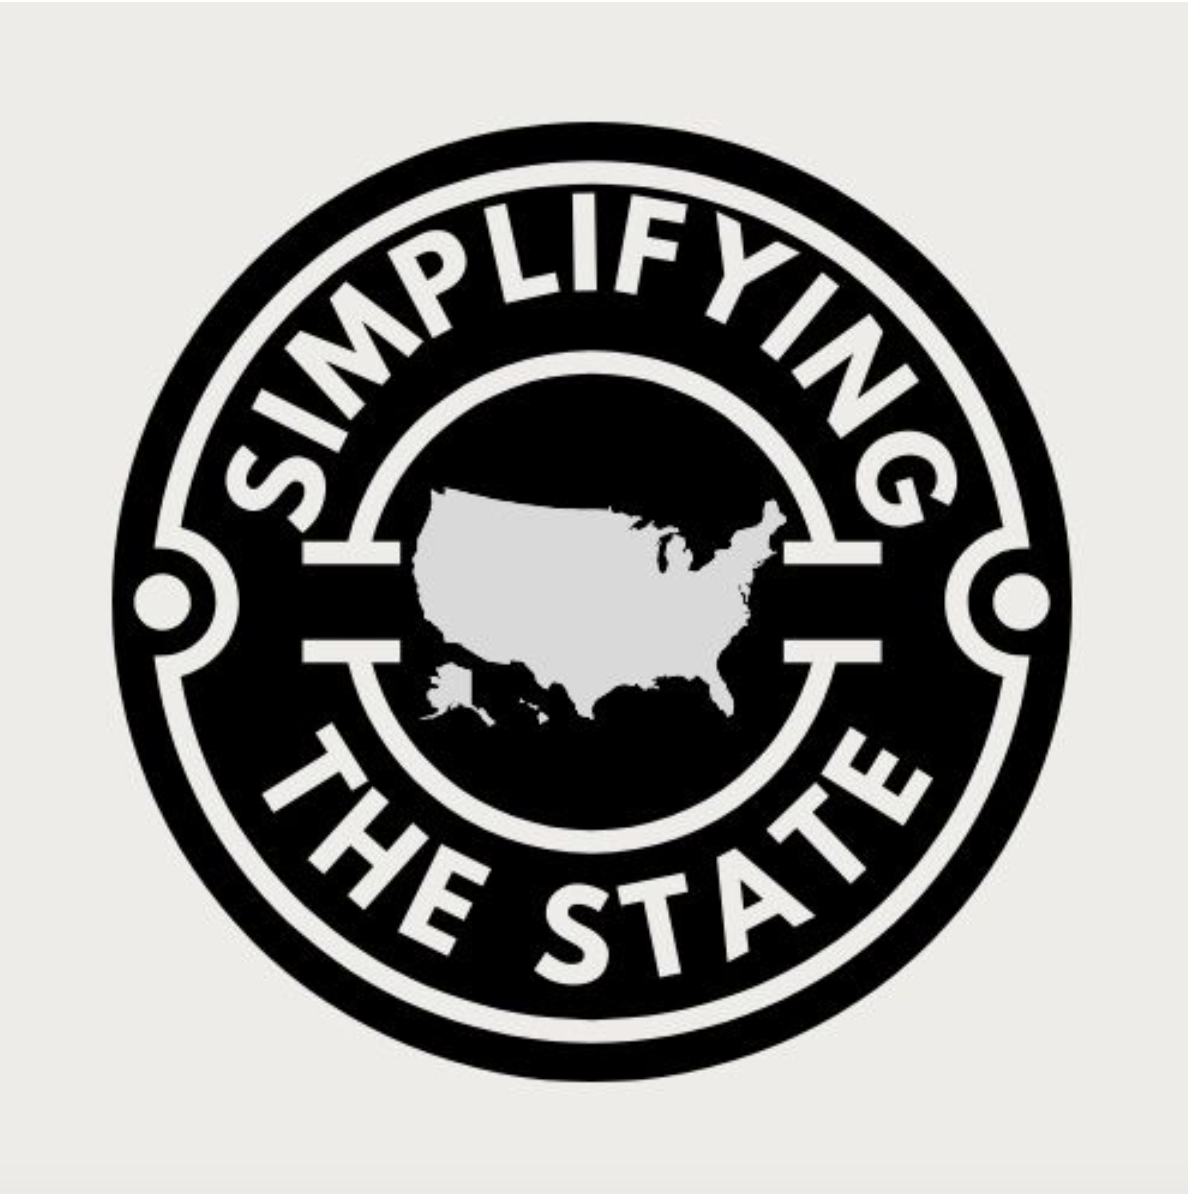 Episode 4: Simplifying the State